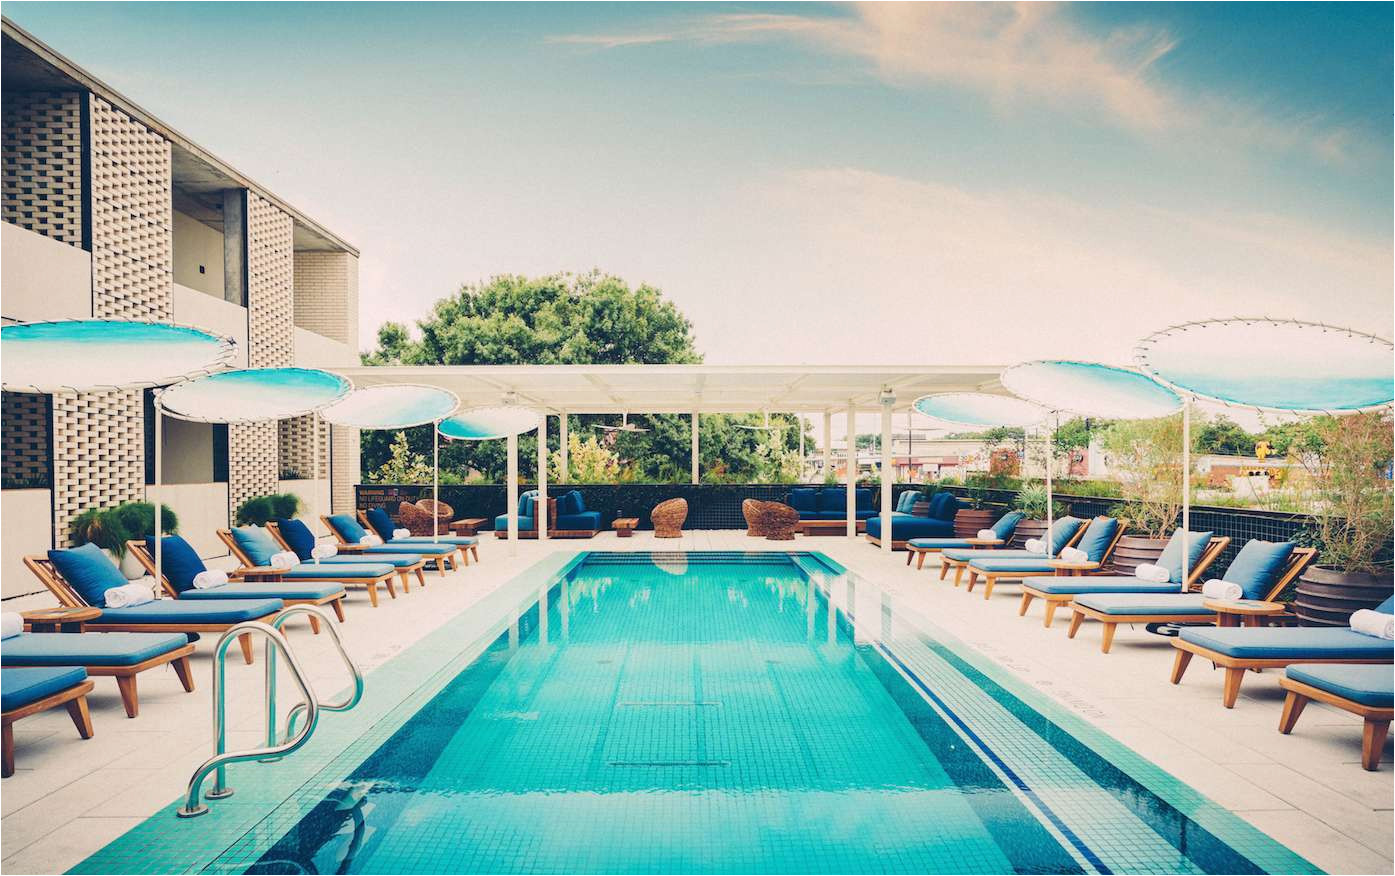 the 9 best austin texas hotels of 2019